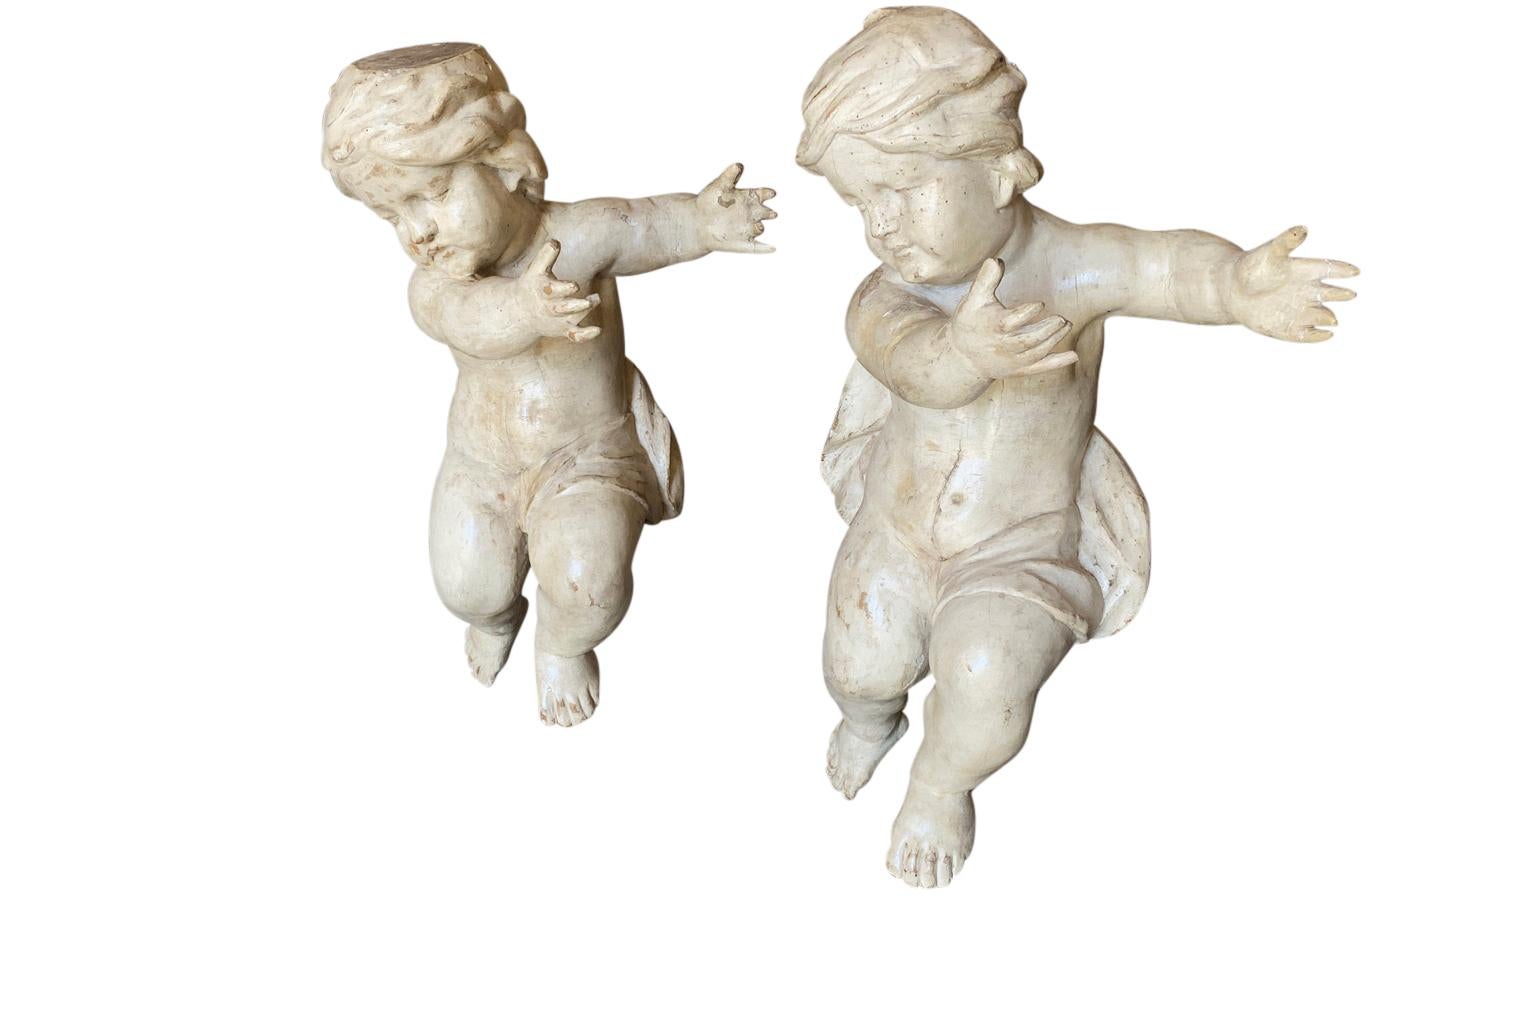 A stunning pair of mid-18th century Italian Baroque Putti beautifully crafted in polychromed wood - now resting on their iron stands. Charming position with outreached hands and sweet faces. On the backside of the head of one of the putti, there is